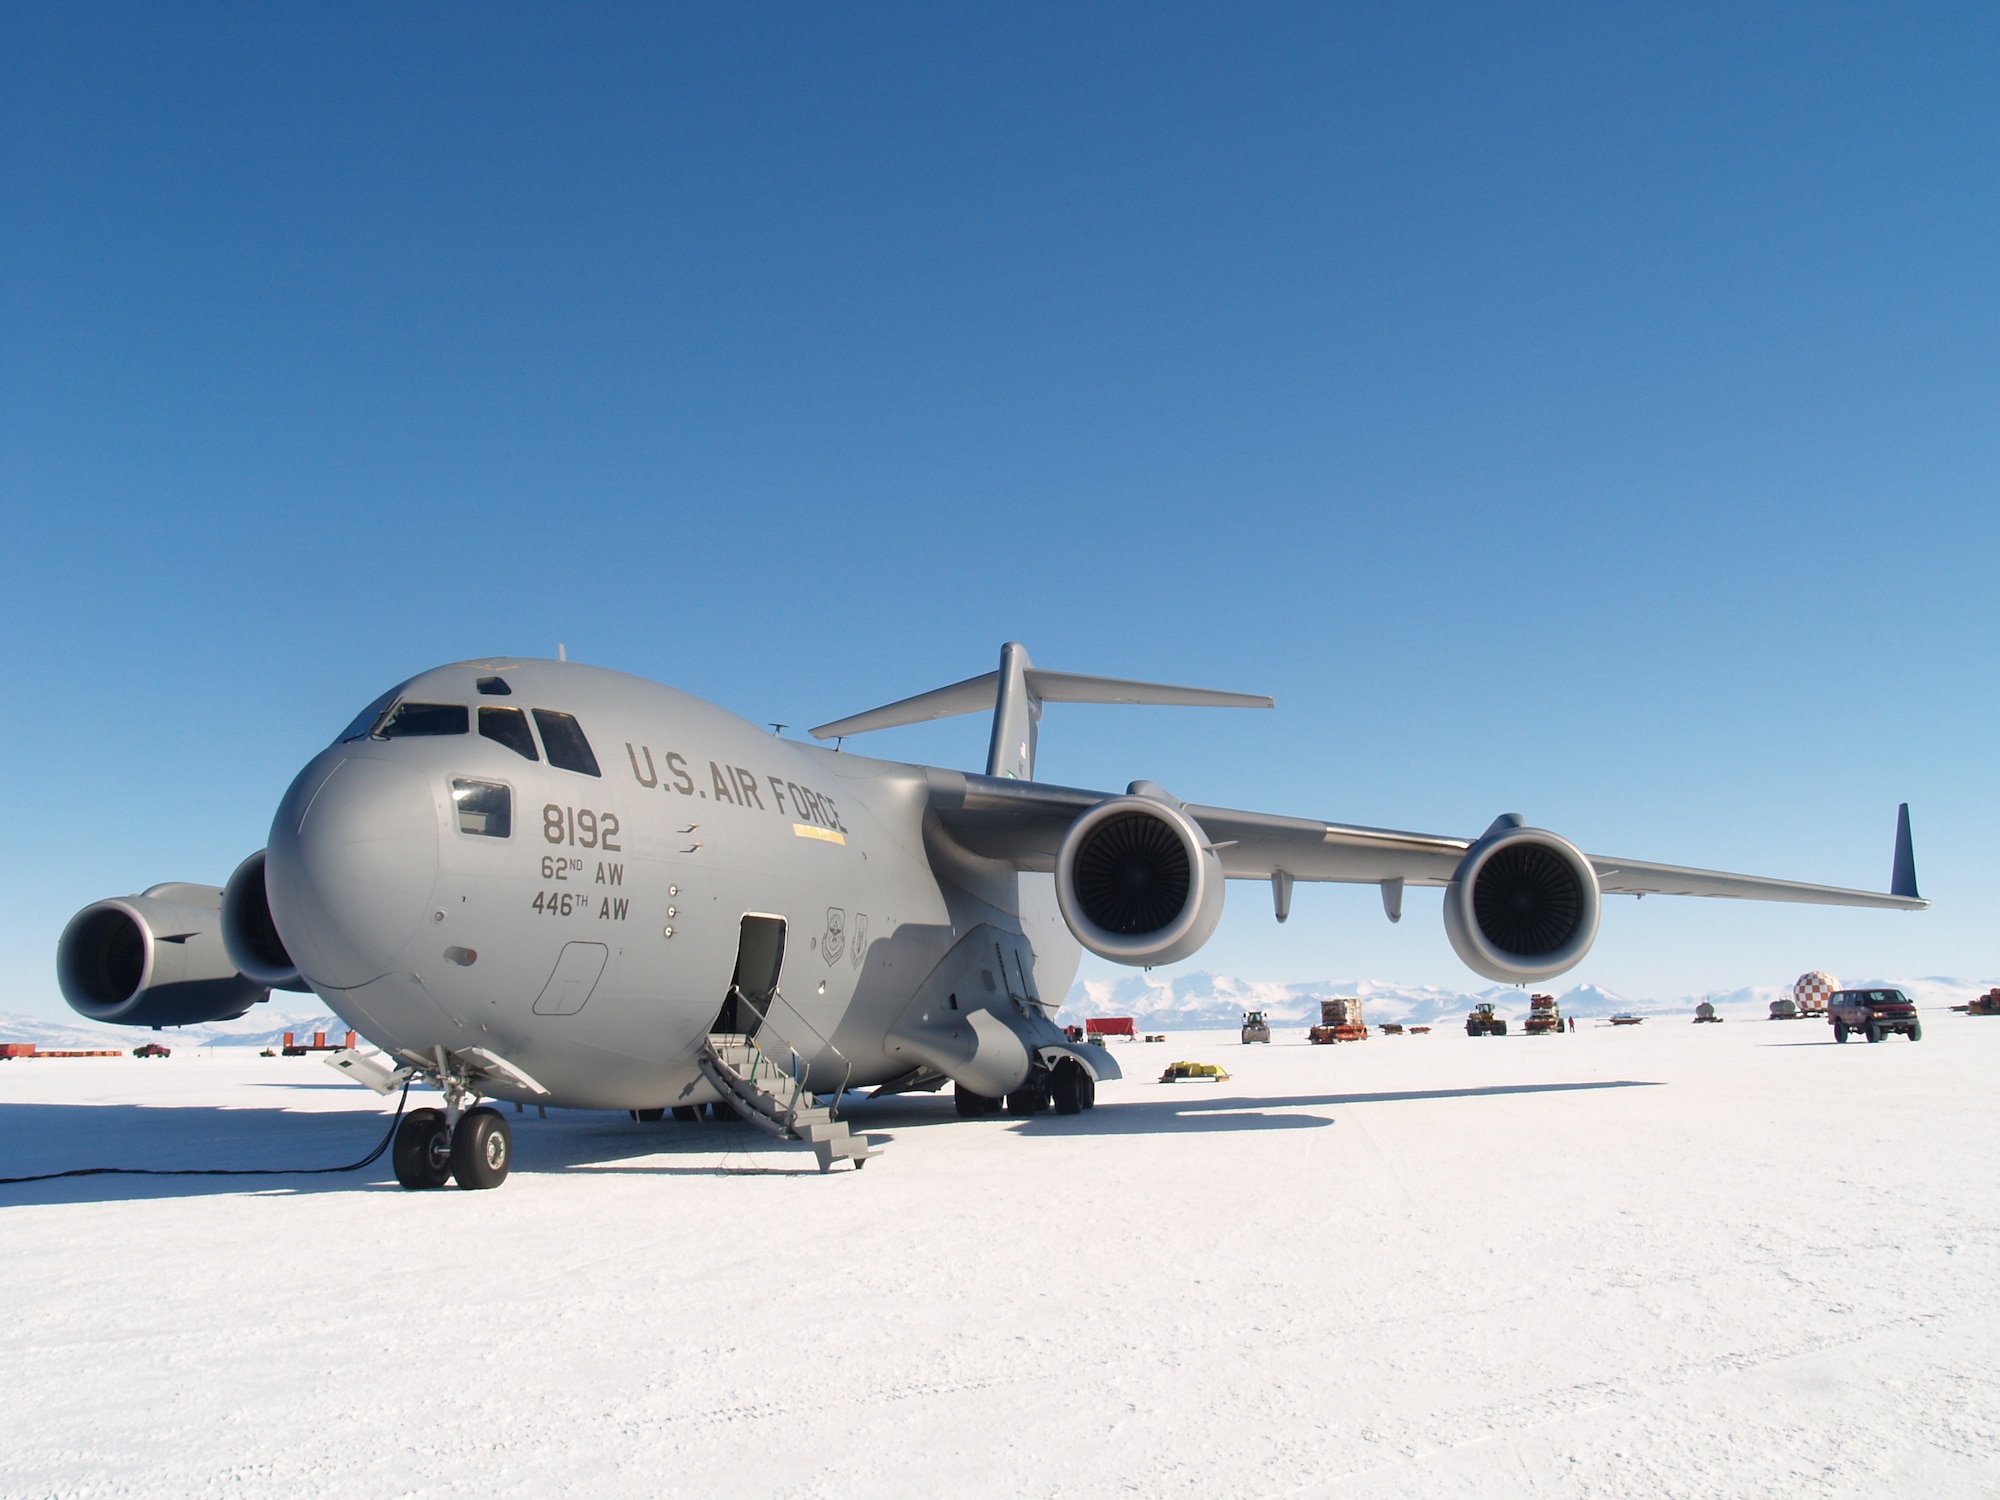 McMURDO STATION, Antarctica--A C-17 sits on the ice runway at McMurdo Station,  The C-17 is a part of Operation Deep Freeze which provides airlift support to the National Science Foundation.  The NSF manages the United States Antarctic Program.